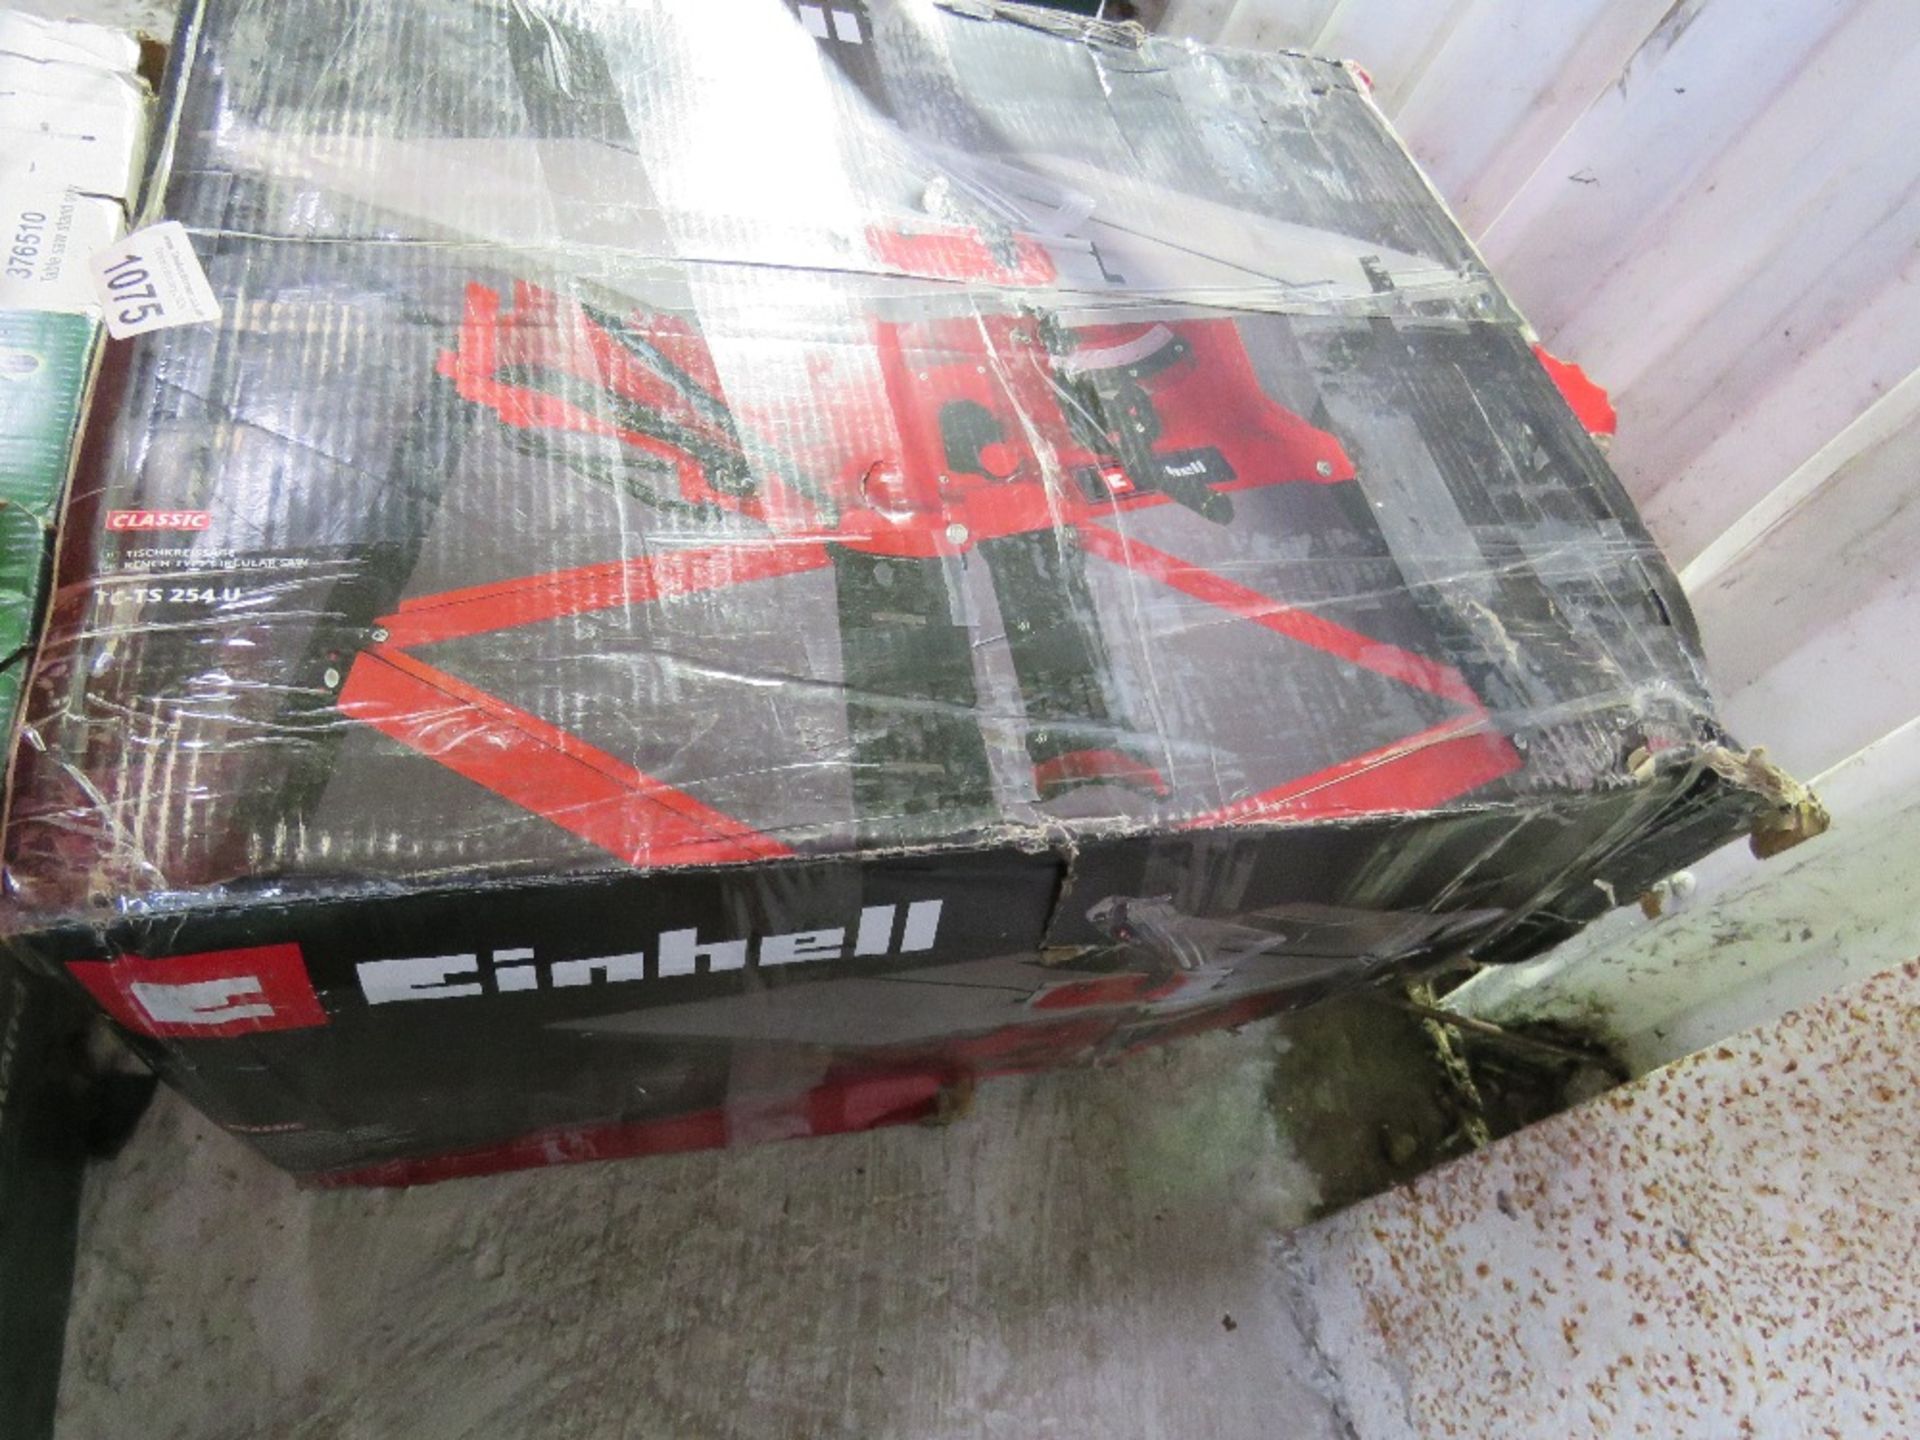 EINHELL TABLE SAW IN A BOX. - Image 2 of 2